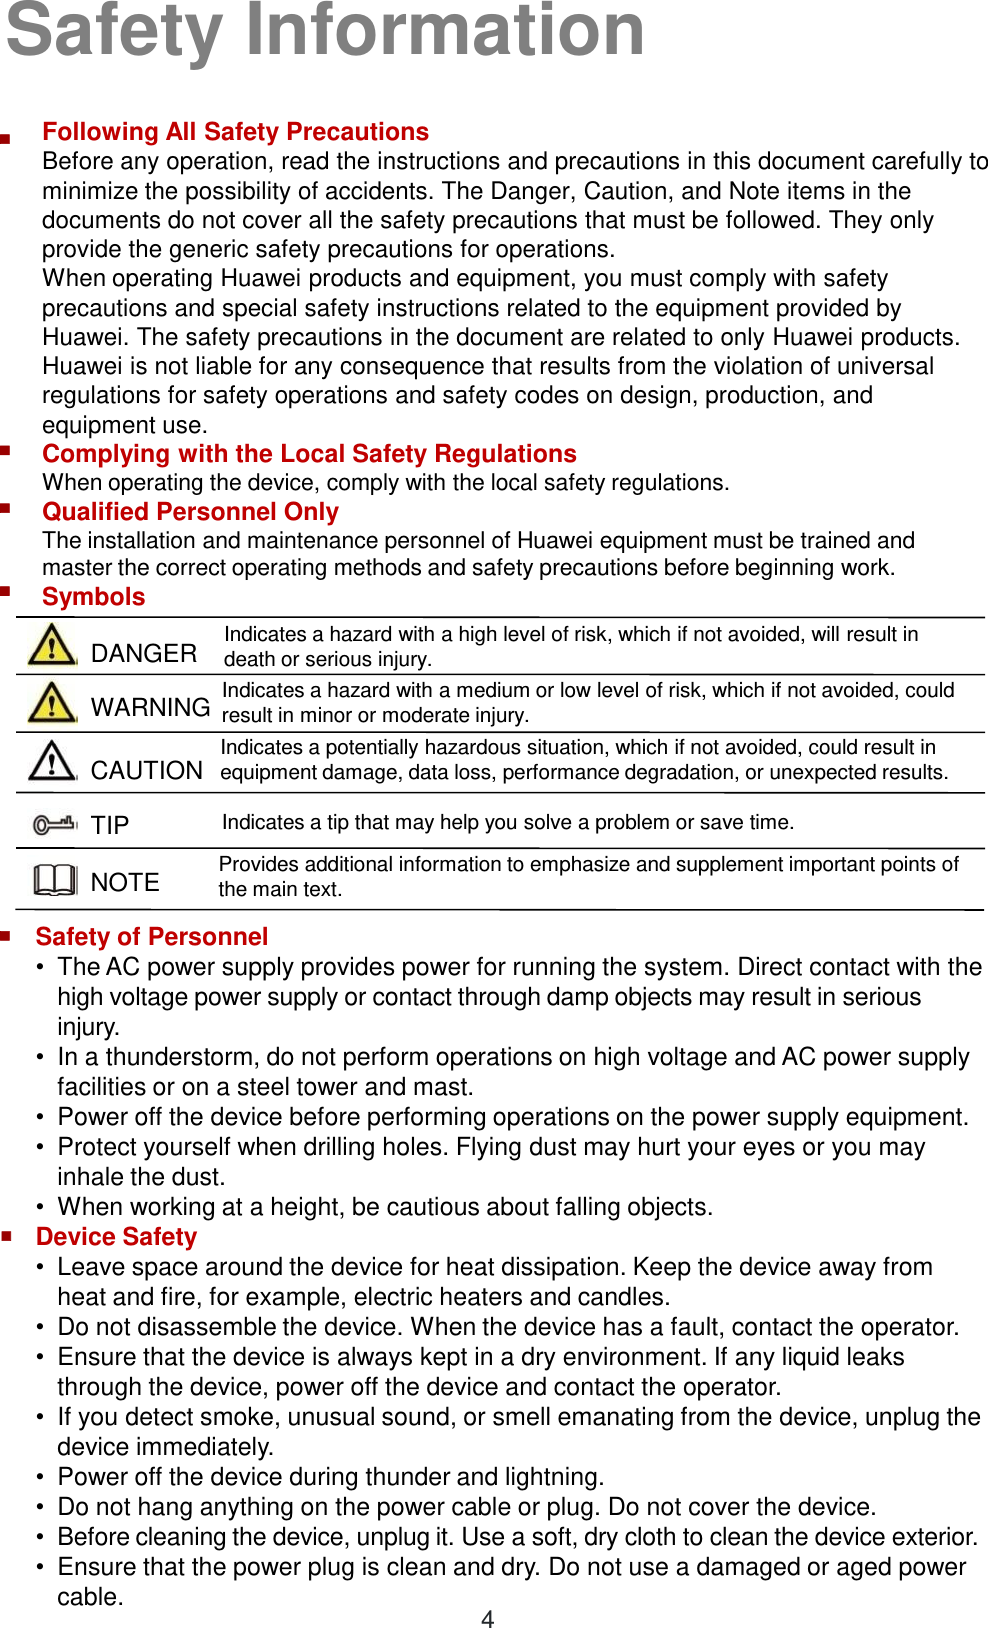  DANGER WARNING CAUTION TIP NOTE Following All Safety Precautions Before any operation, read the instructions and precautions in this document carefully to minimize the possibility of accidents. The Danger, Caution, and Note items in the documents do not cover all the safety precautions that must be followed. They only provide the generic safety precautions for operations.  When operating Huawei products and equipment, you must comply with safety precautions and special safety instructions related to the equipment provided by Huawei. The safety precautions in the document are related to only Huawei products. Huawei is not liable for any consequence that results from the violation of universal regulations for safety operations and safety codes on design, production, and equipment use.  Complying with the Local Safety Regulations When operating the device, comply with the local safety regulations.  Qualified Personnel Only  The installation and maintenance personnel of Huawei equipment must be trained and master the correct operating methods and safety precautions before beginning work.  Symbols Indicates a hazard with a high level of risk, which if not avoided, will result in death or serious injury.  Indicates a potentially hazardous situation, which if not avoided, could result in equipment damage, data loss, performance degradation, or unexpected results. Indicates a tip that may help you solve a problem or save time. Safety of Personnel •The AC power supply provides power for running the system. Direct contact with the high voltage power supply or contact through damp objects may result in serious injury.  •In a thunderstorm, do not perform operations on high voltage and AC power supply facilities or on a steel tower and mast.  •Power off the device before performing operations on the power supply equipment.  •Protect yourself when drilling holes. Flying dust may hurt your eyes or you may inhale the dust.  •When working at a height, be cautious about falling objects.  Device Safety •Leave space around the device for heat dissipation. Keep the device away from heat and fire, for example, electric heaters and candles.  •Do not disassemble the device. When the device has a fault, contact the operator.  •Ensure that the device is always kept in a dry environment. If any liquid leaks through the device, power off the device and contact the operator. •If you detect smoke, unusual sound, or smell emanating from the device, unplug the device immediately.  •Power off the device during thunder and lightning.  •Do not hang anything on the power cable or plug. Do not cover the device.  •Before cleaning the device, unplug it. Use a soft, dry cloth to clean the device exterior. •Ensure that the power plug is clean and dry. Do not use a damaged or aged power cable.  ■ ■ ■ ■ ■ ■ Indicates a hazard with a medium or low level of risk, which if not avoided, could result in minor or moderate injury. Provides additional information to emphasize and supplement important points of the main text. Safety Information 4 